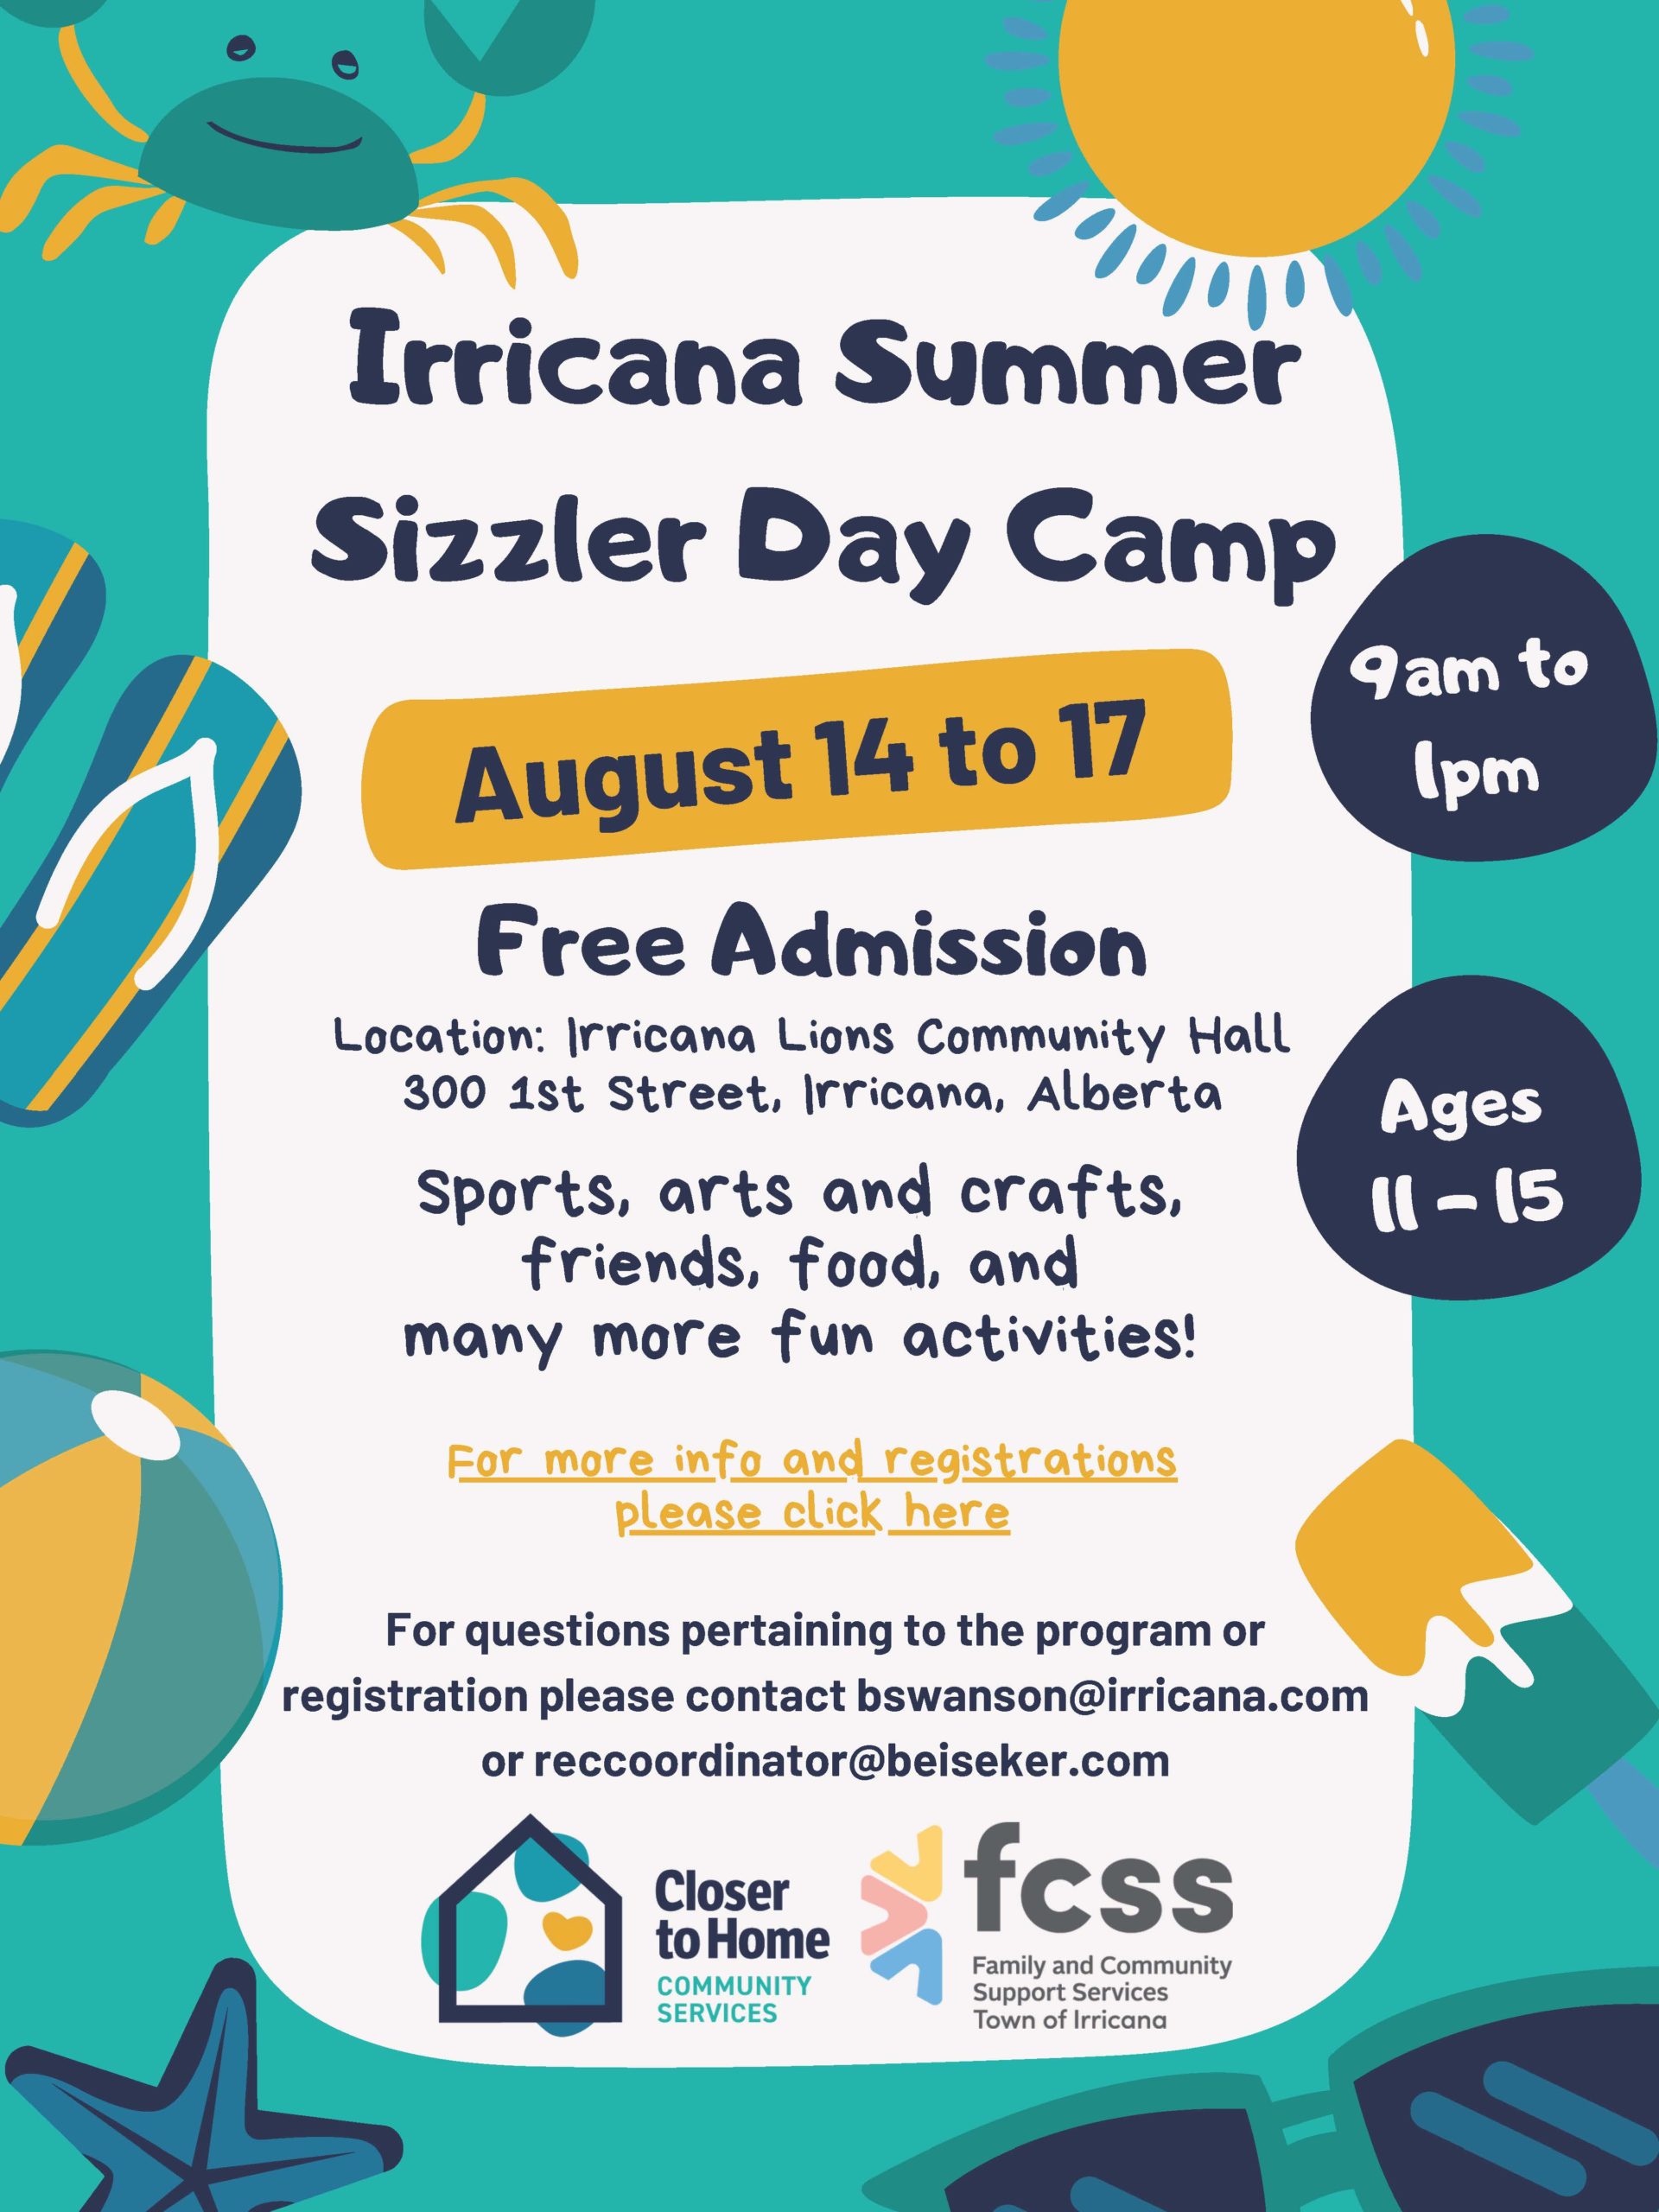 Closer to Home in Partnership with Irricana FCSS presents Irricana Summer Sizzler Day Camp from August 14-17, 2023